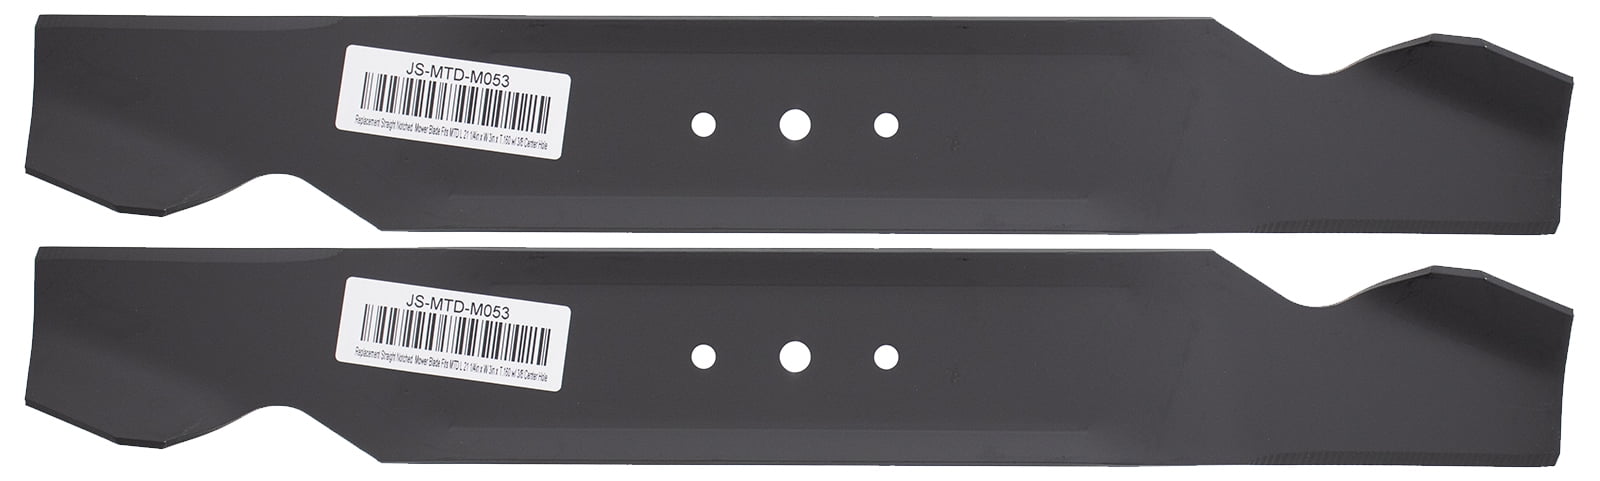 2 Hi Lift Blades Replacement for MTD White 942-0499A 742-0499A 942-0499 742-0499 